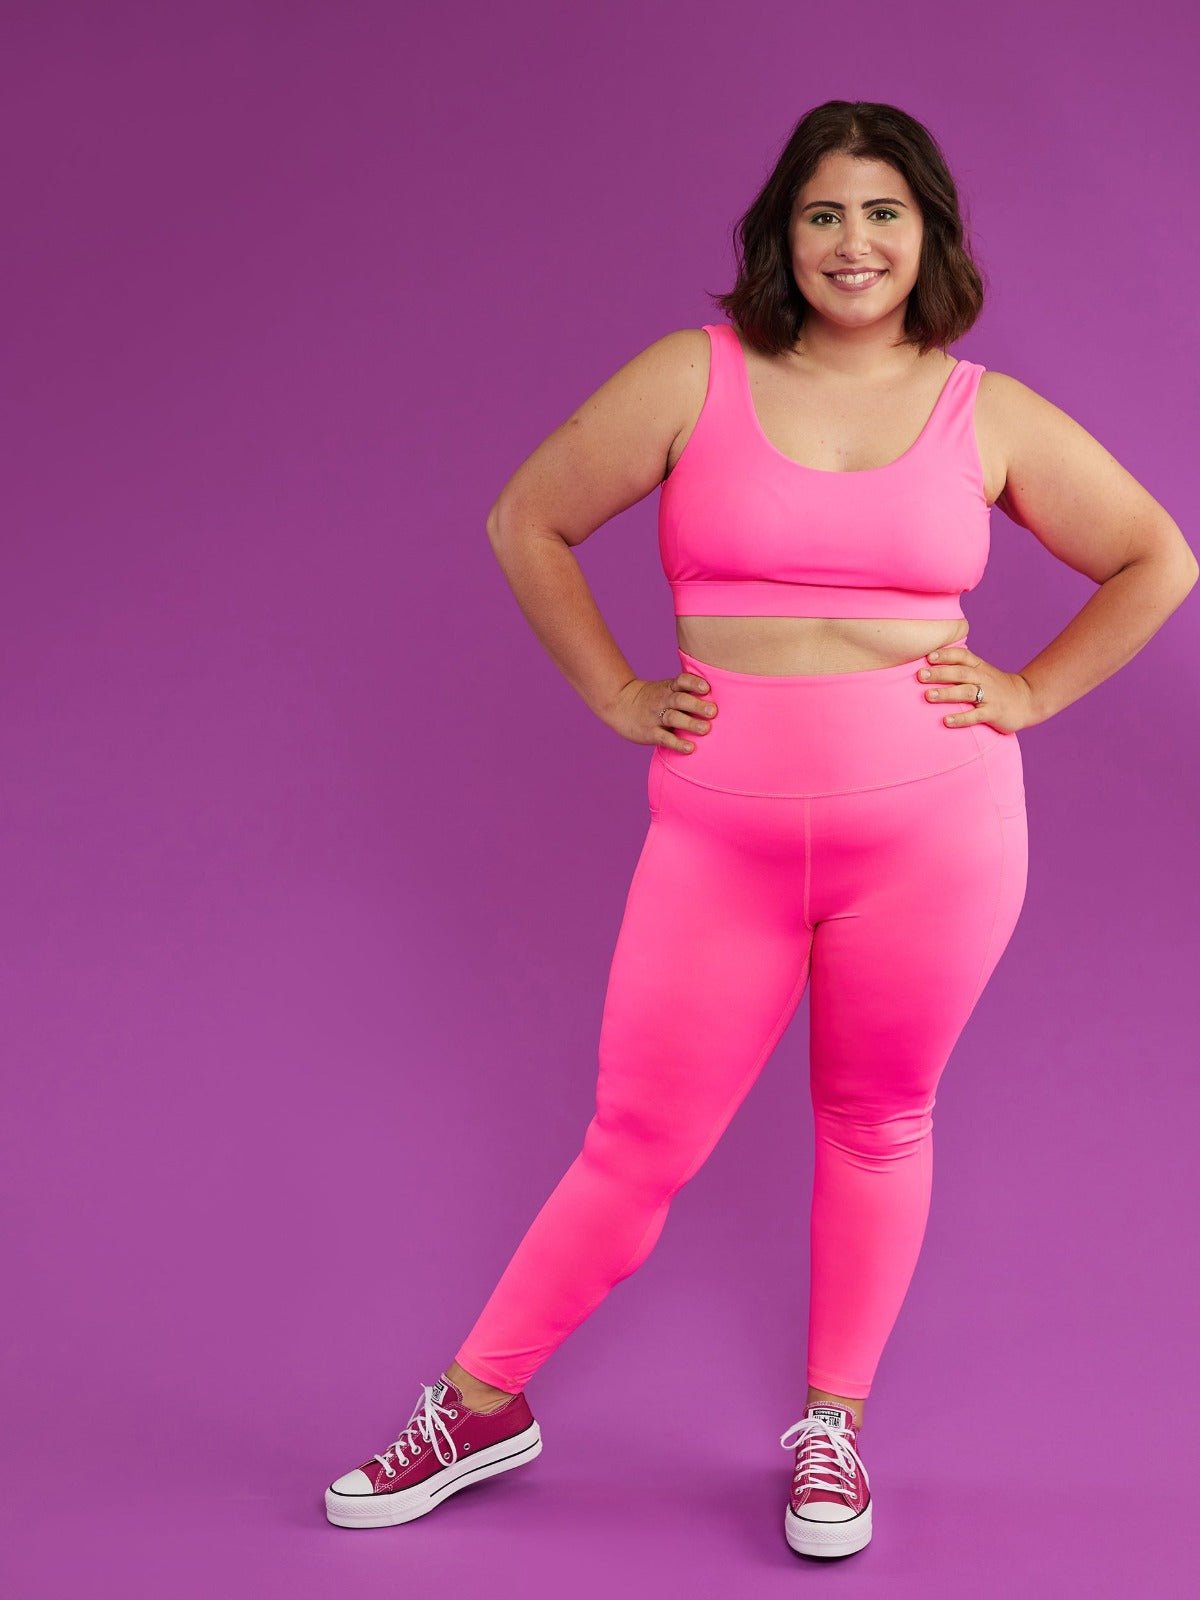 Neon Pink Everyday Legging - 7/8 length - bright pink legging 7/8 high waist with pockets